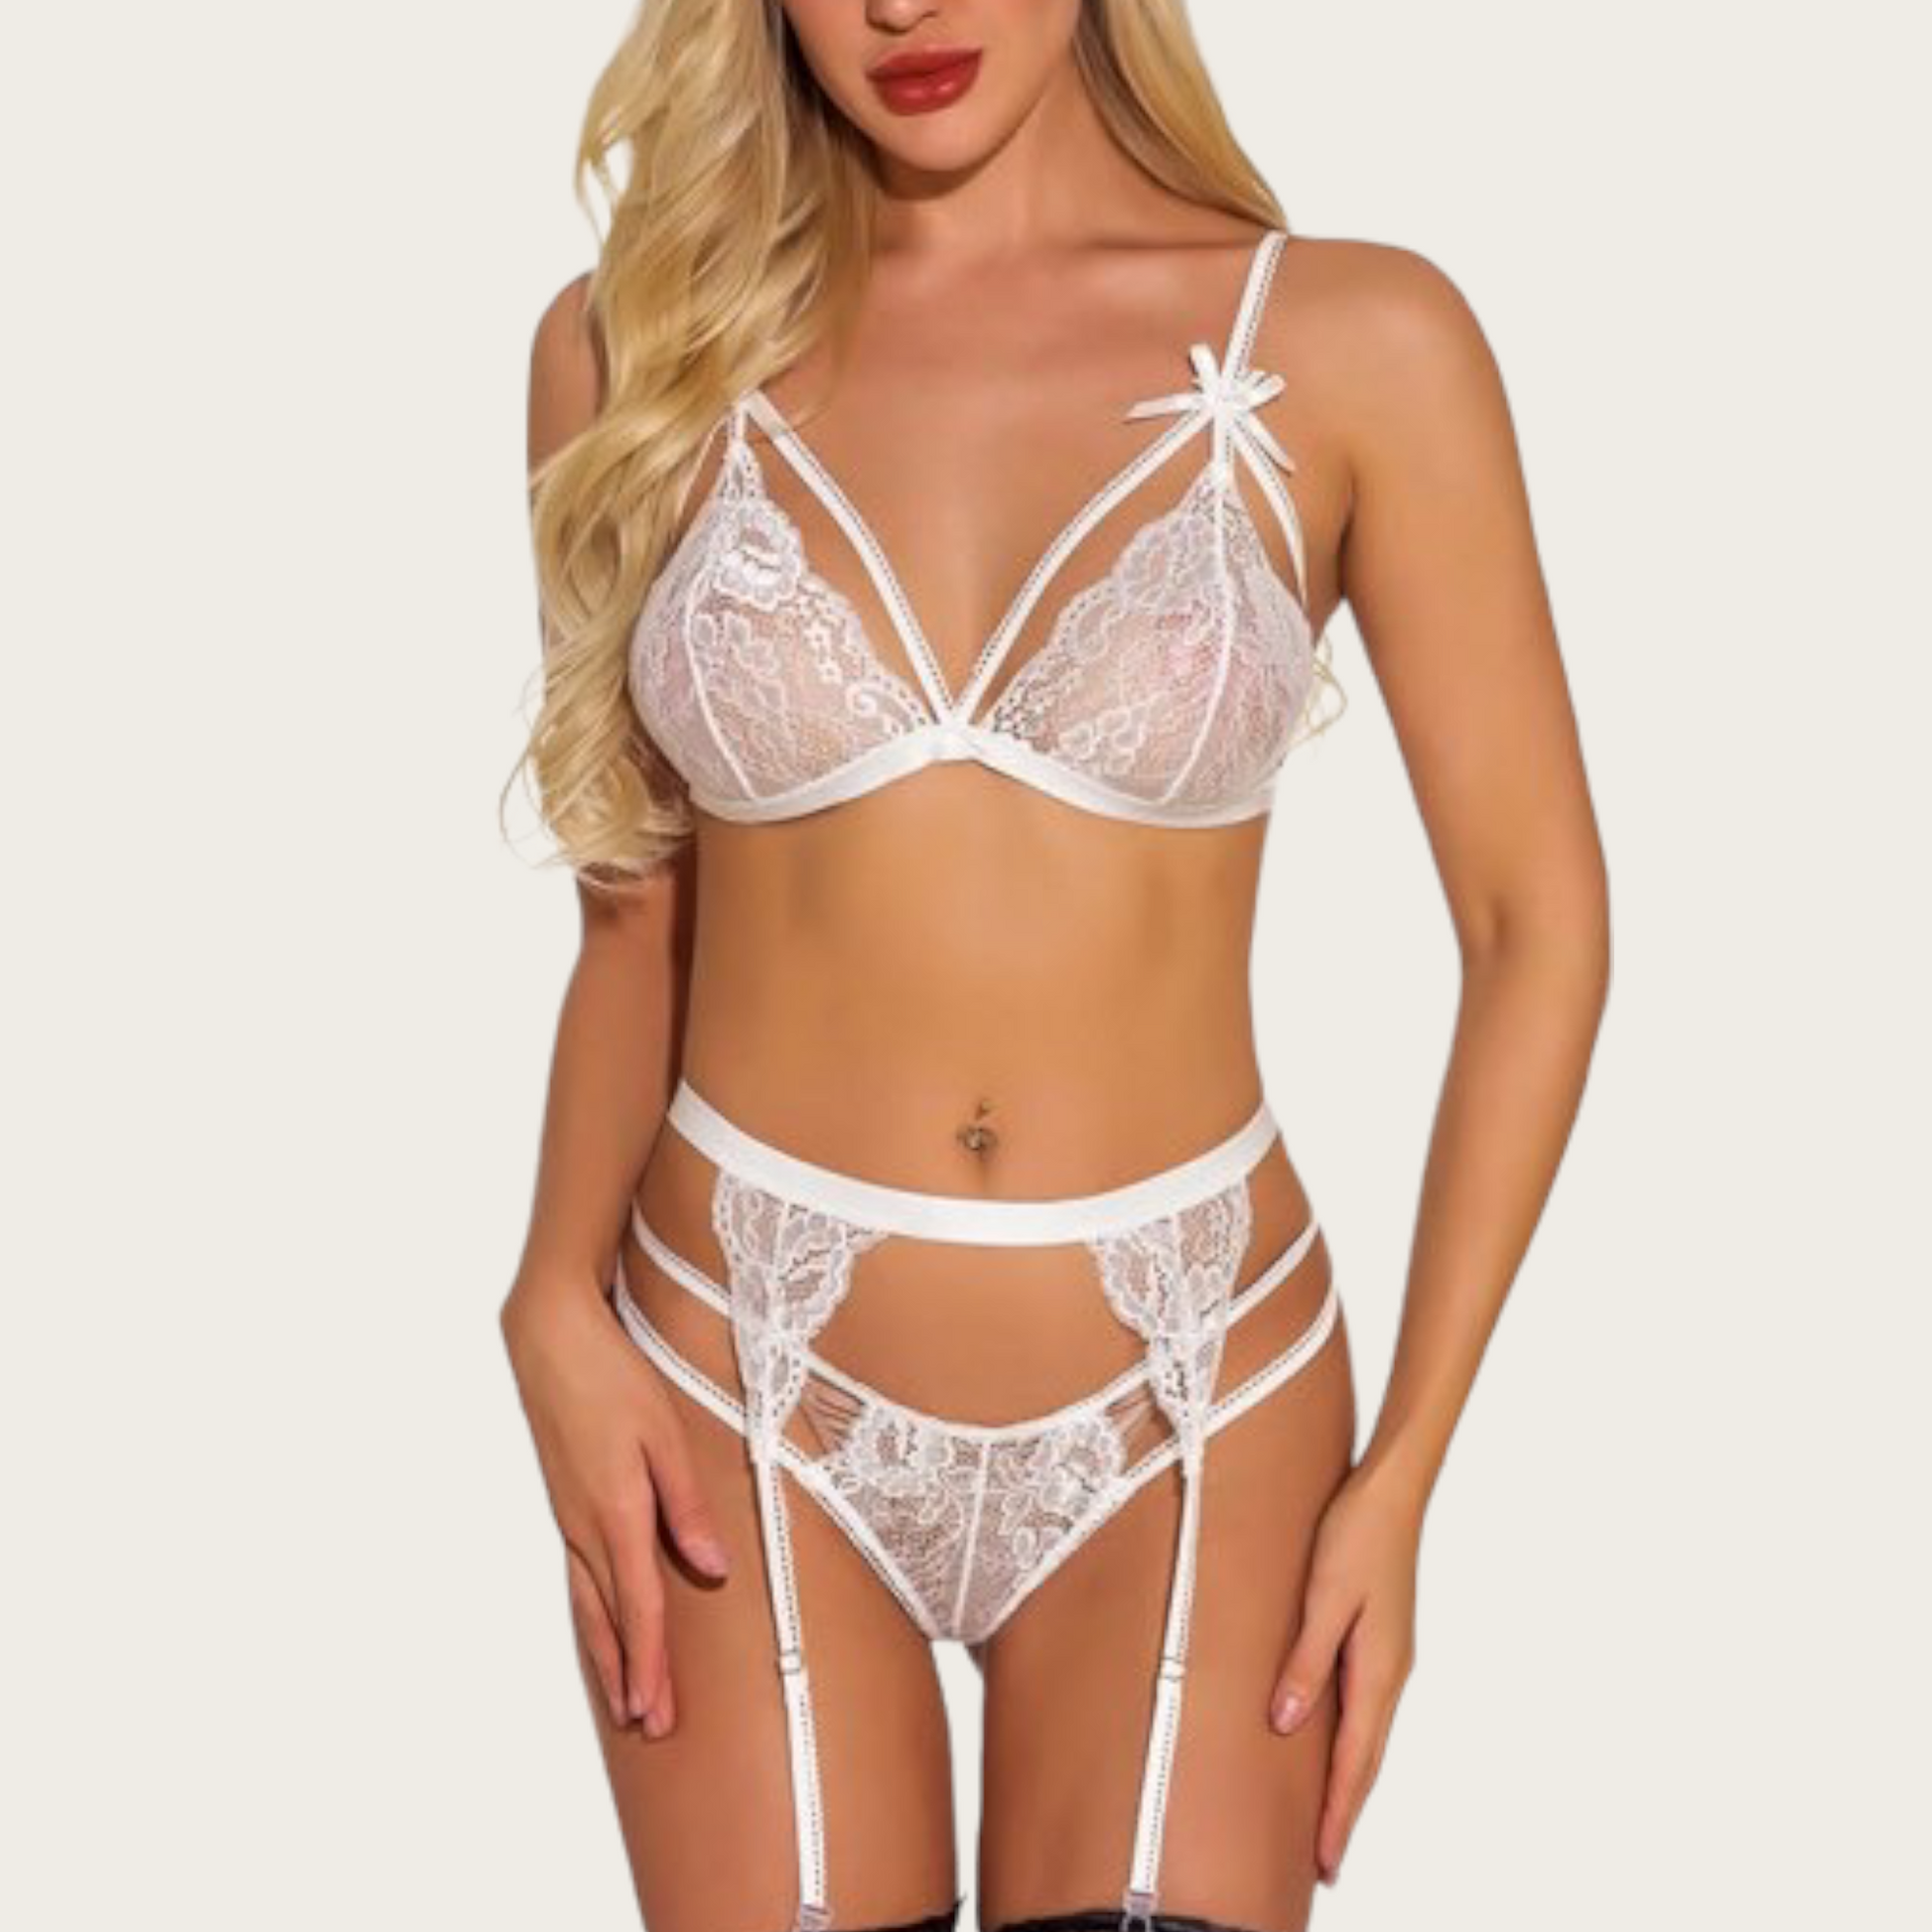 Own Your Place Garter Lingerie Set - White - Pikemla